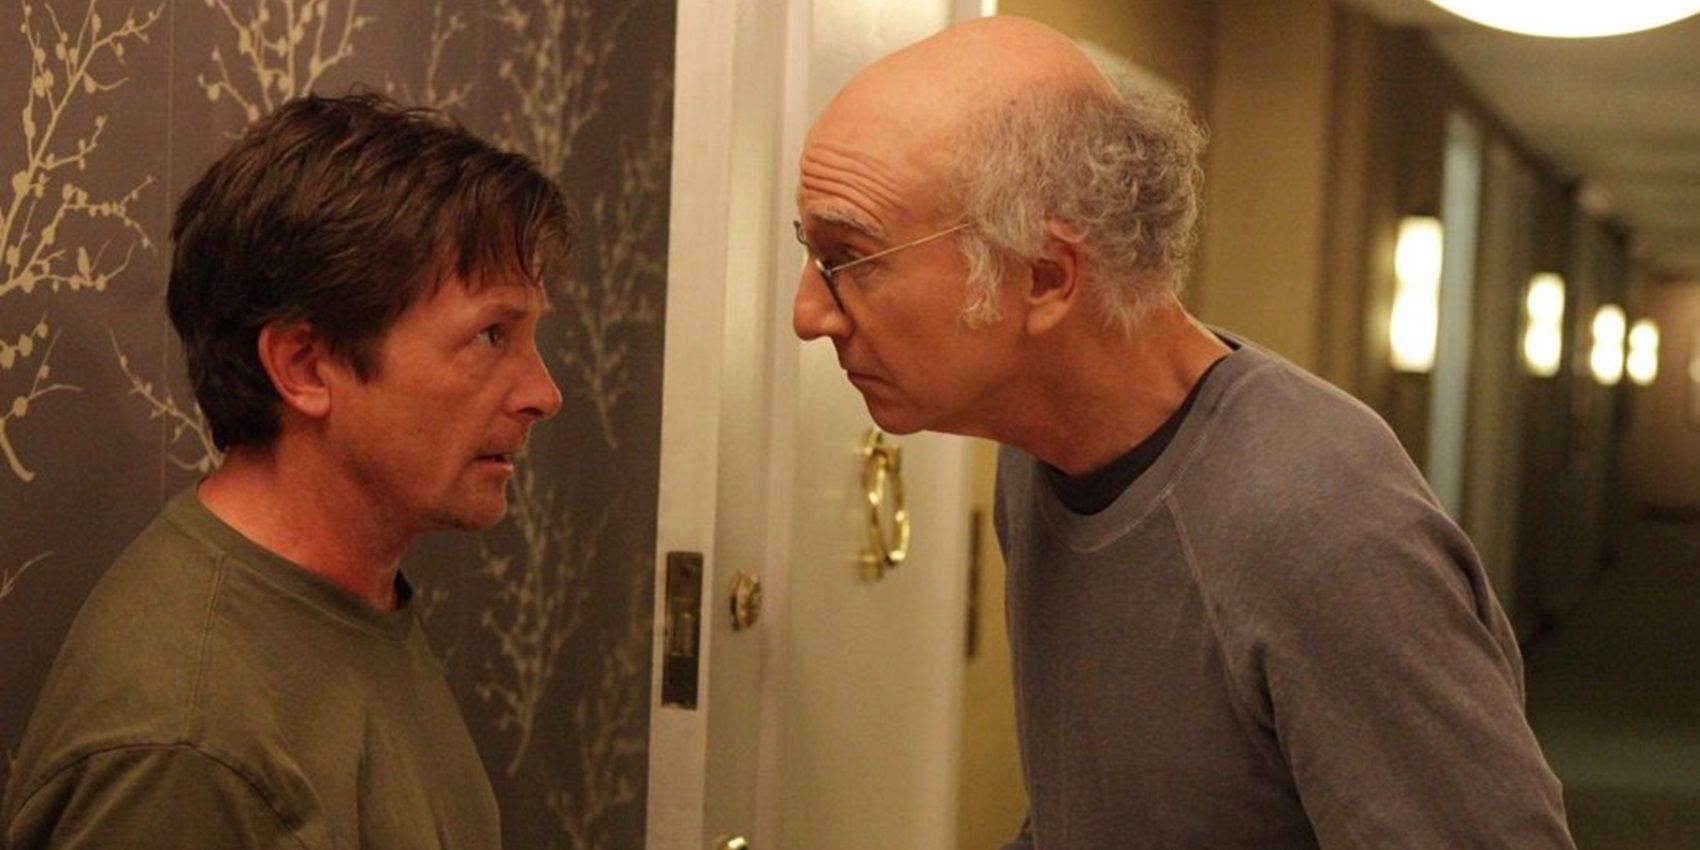 10 Best Larry David & Susie Greene Fights In Curb Your Enthusiasm, Ranked